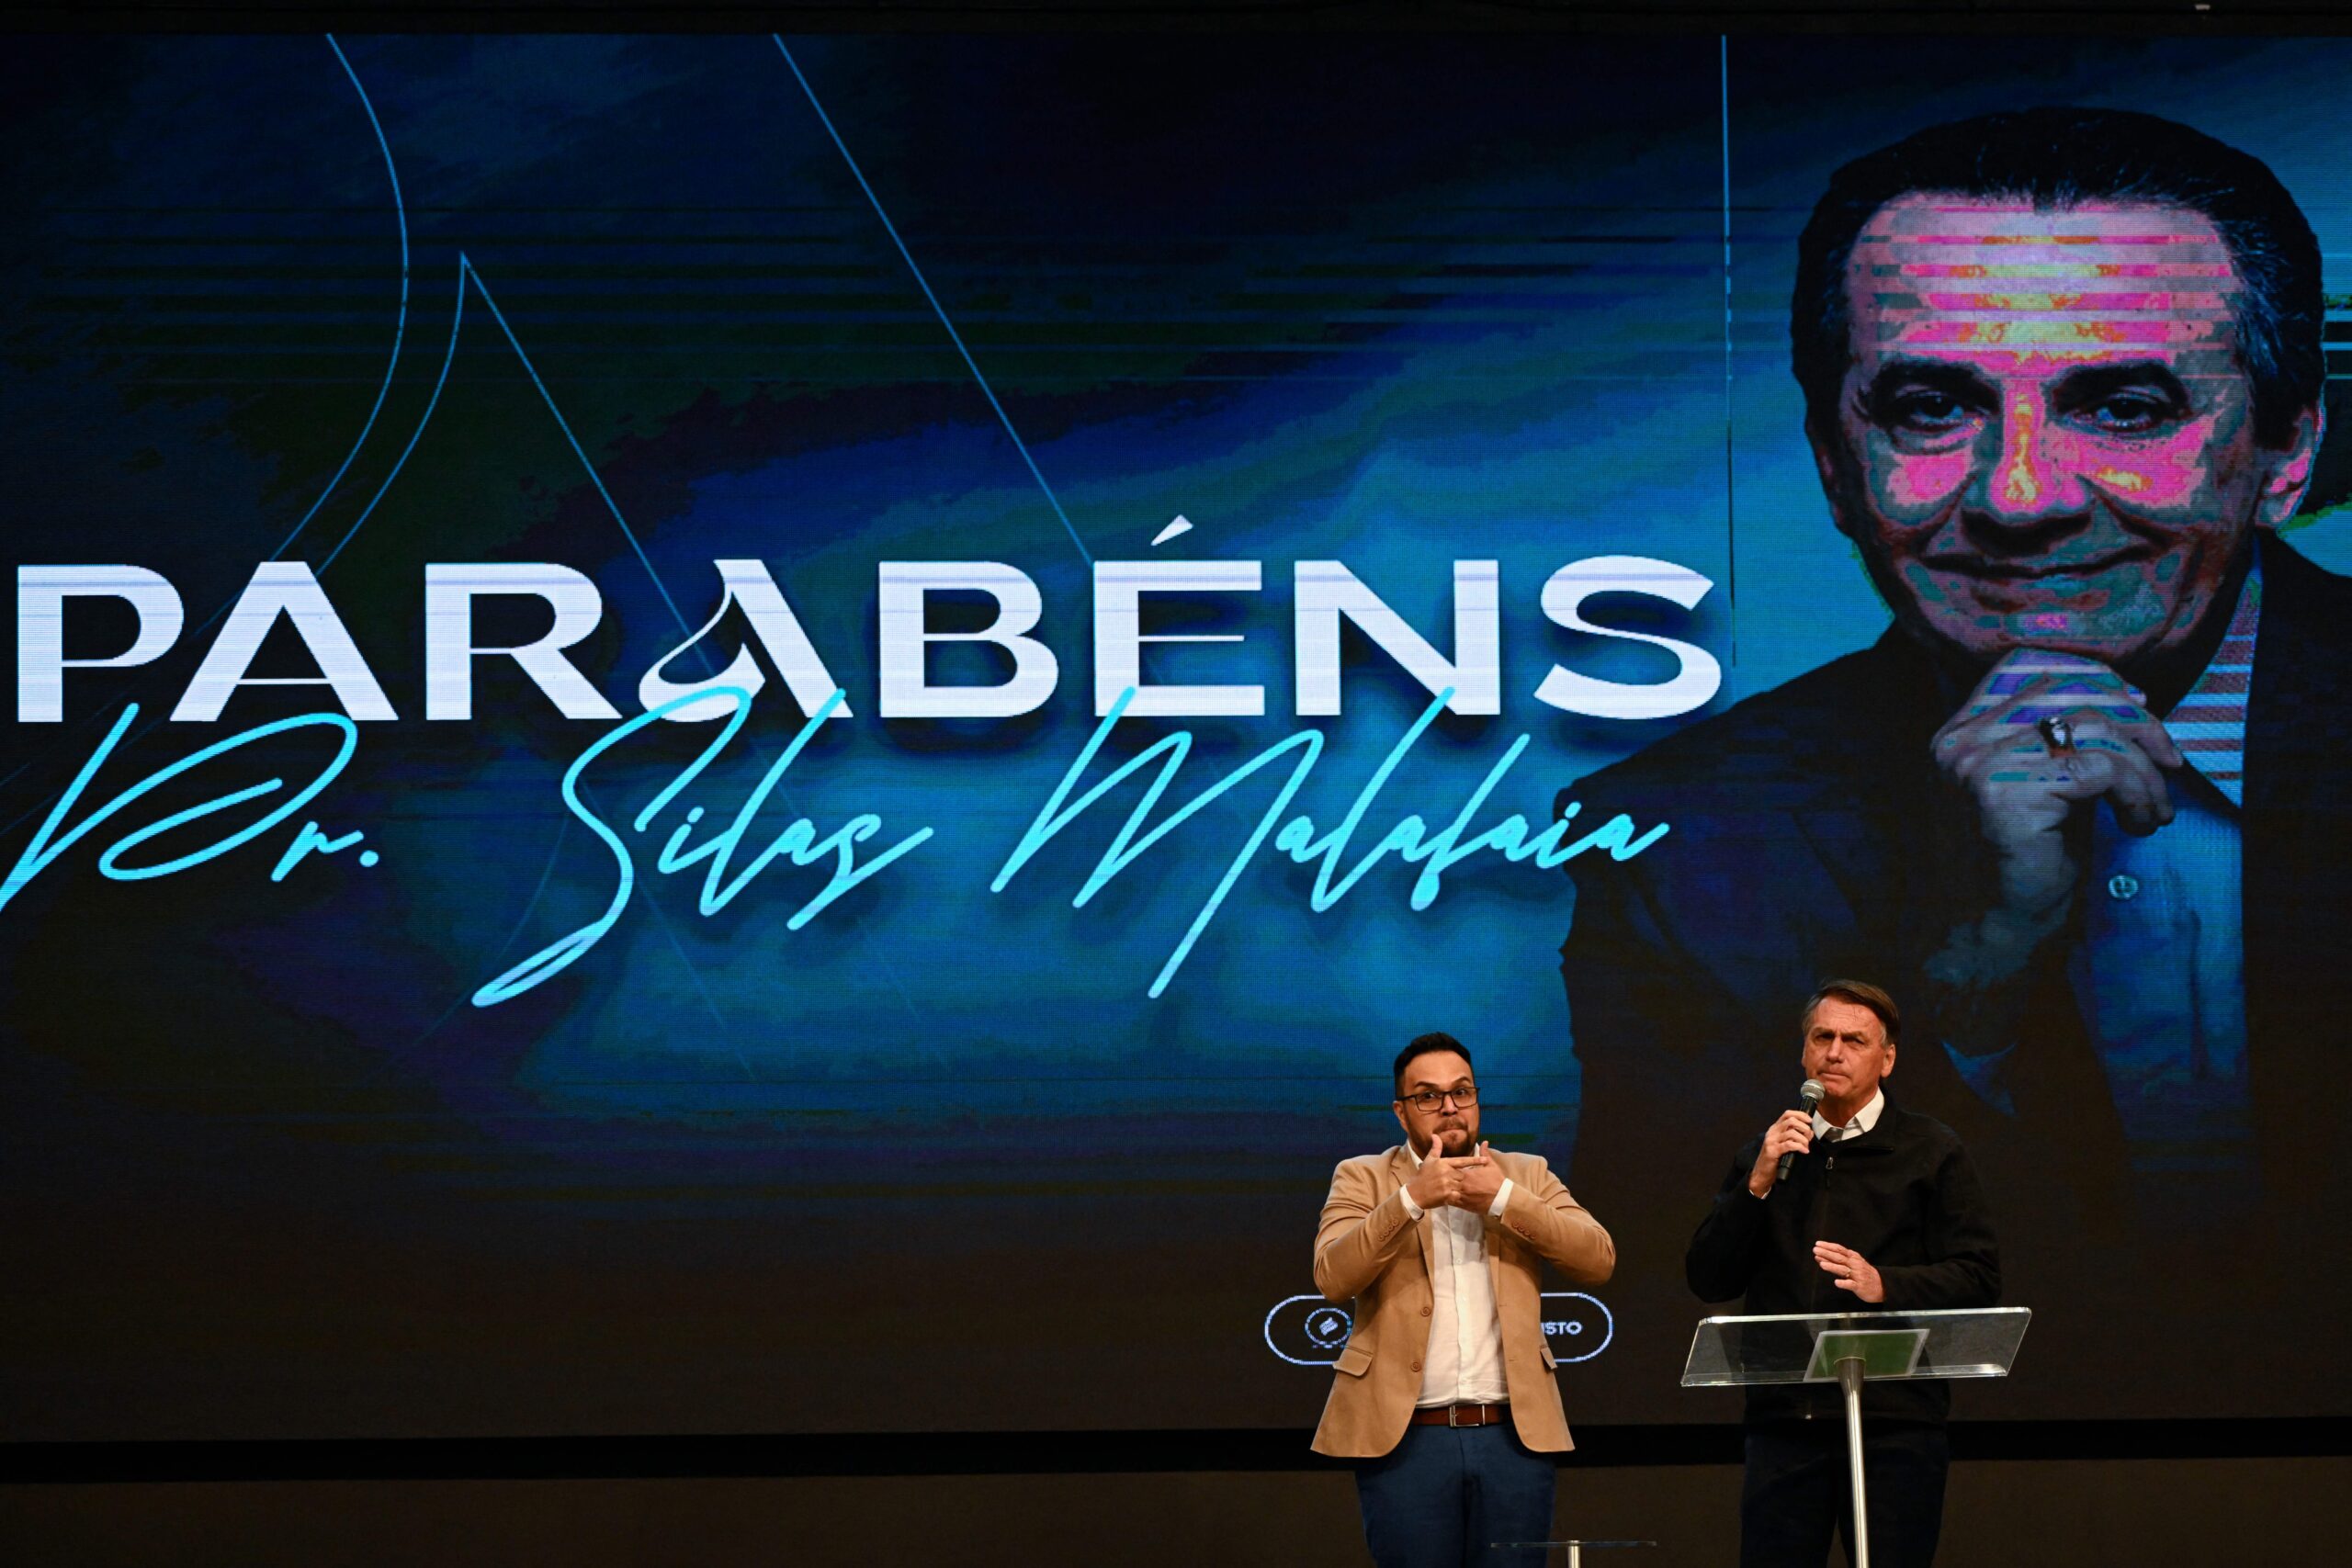 A Brazilian evangelical megachurch pastor and former President Jair Bolsonaro of Brazil stand together on stage.